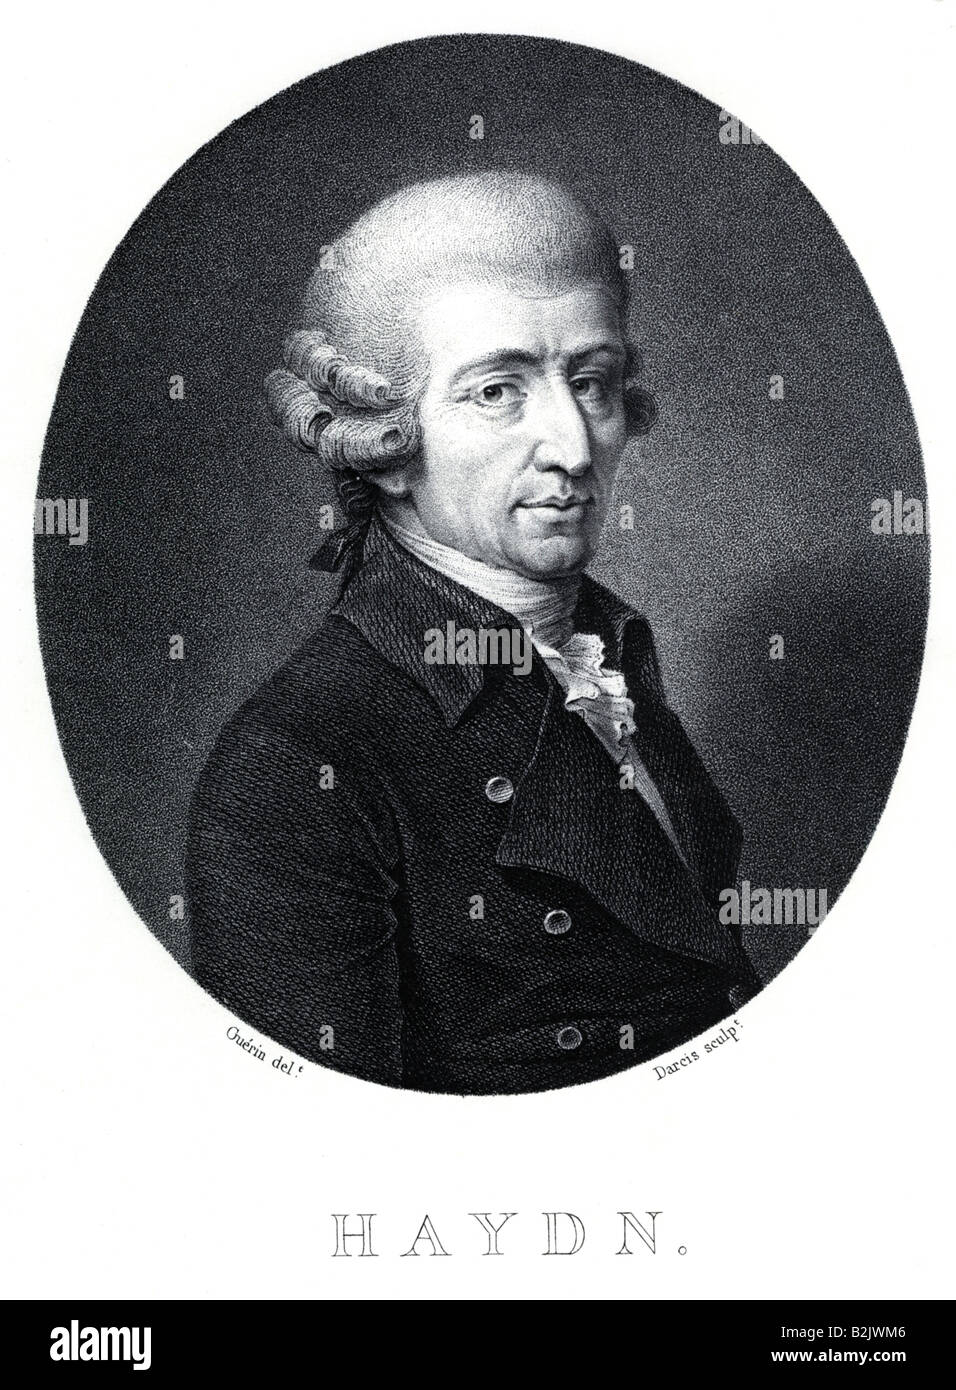 Haydn, Joseph, 31.3.1732 - 31.5.1809, Austrian composer, portrait, engraving, by Darcis, based on a drawing by Guerin, 19th century, Stock Photo